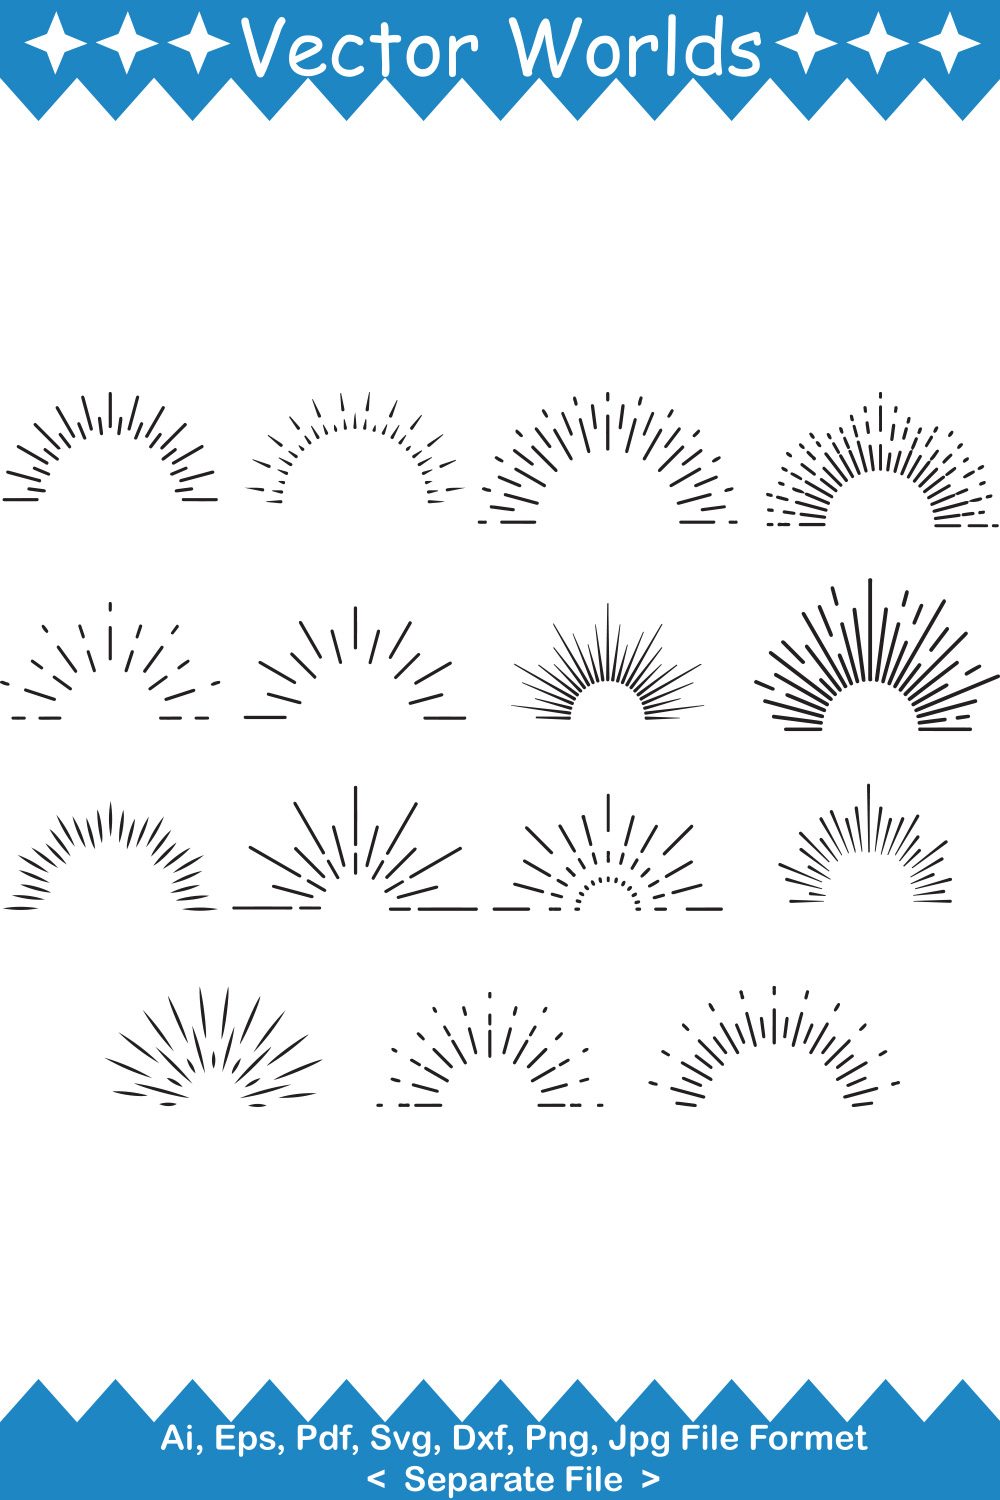 A selection of vector gorgeous images of sunburst silhouettes.